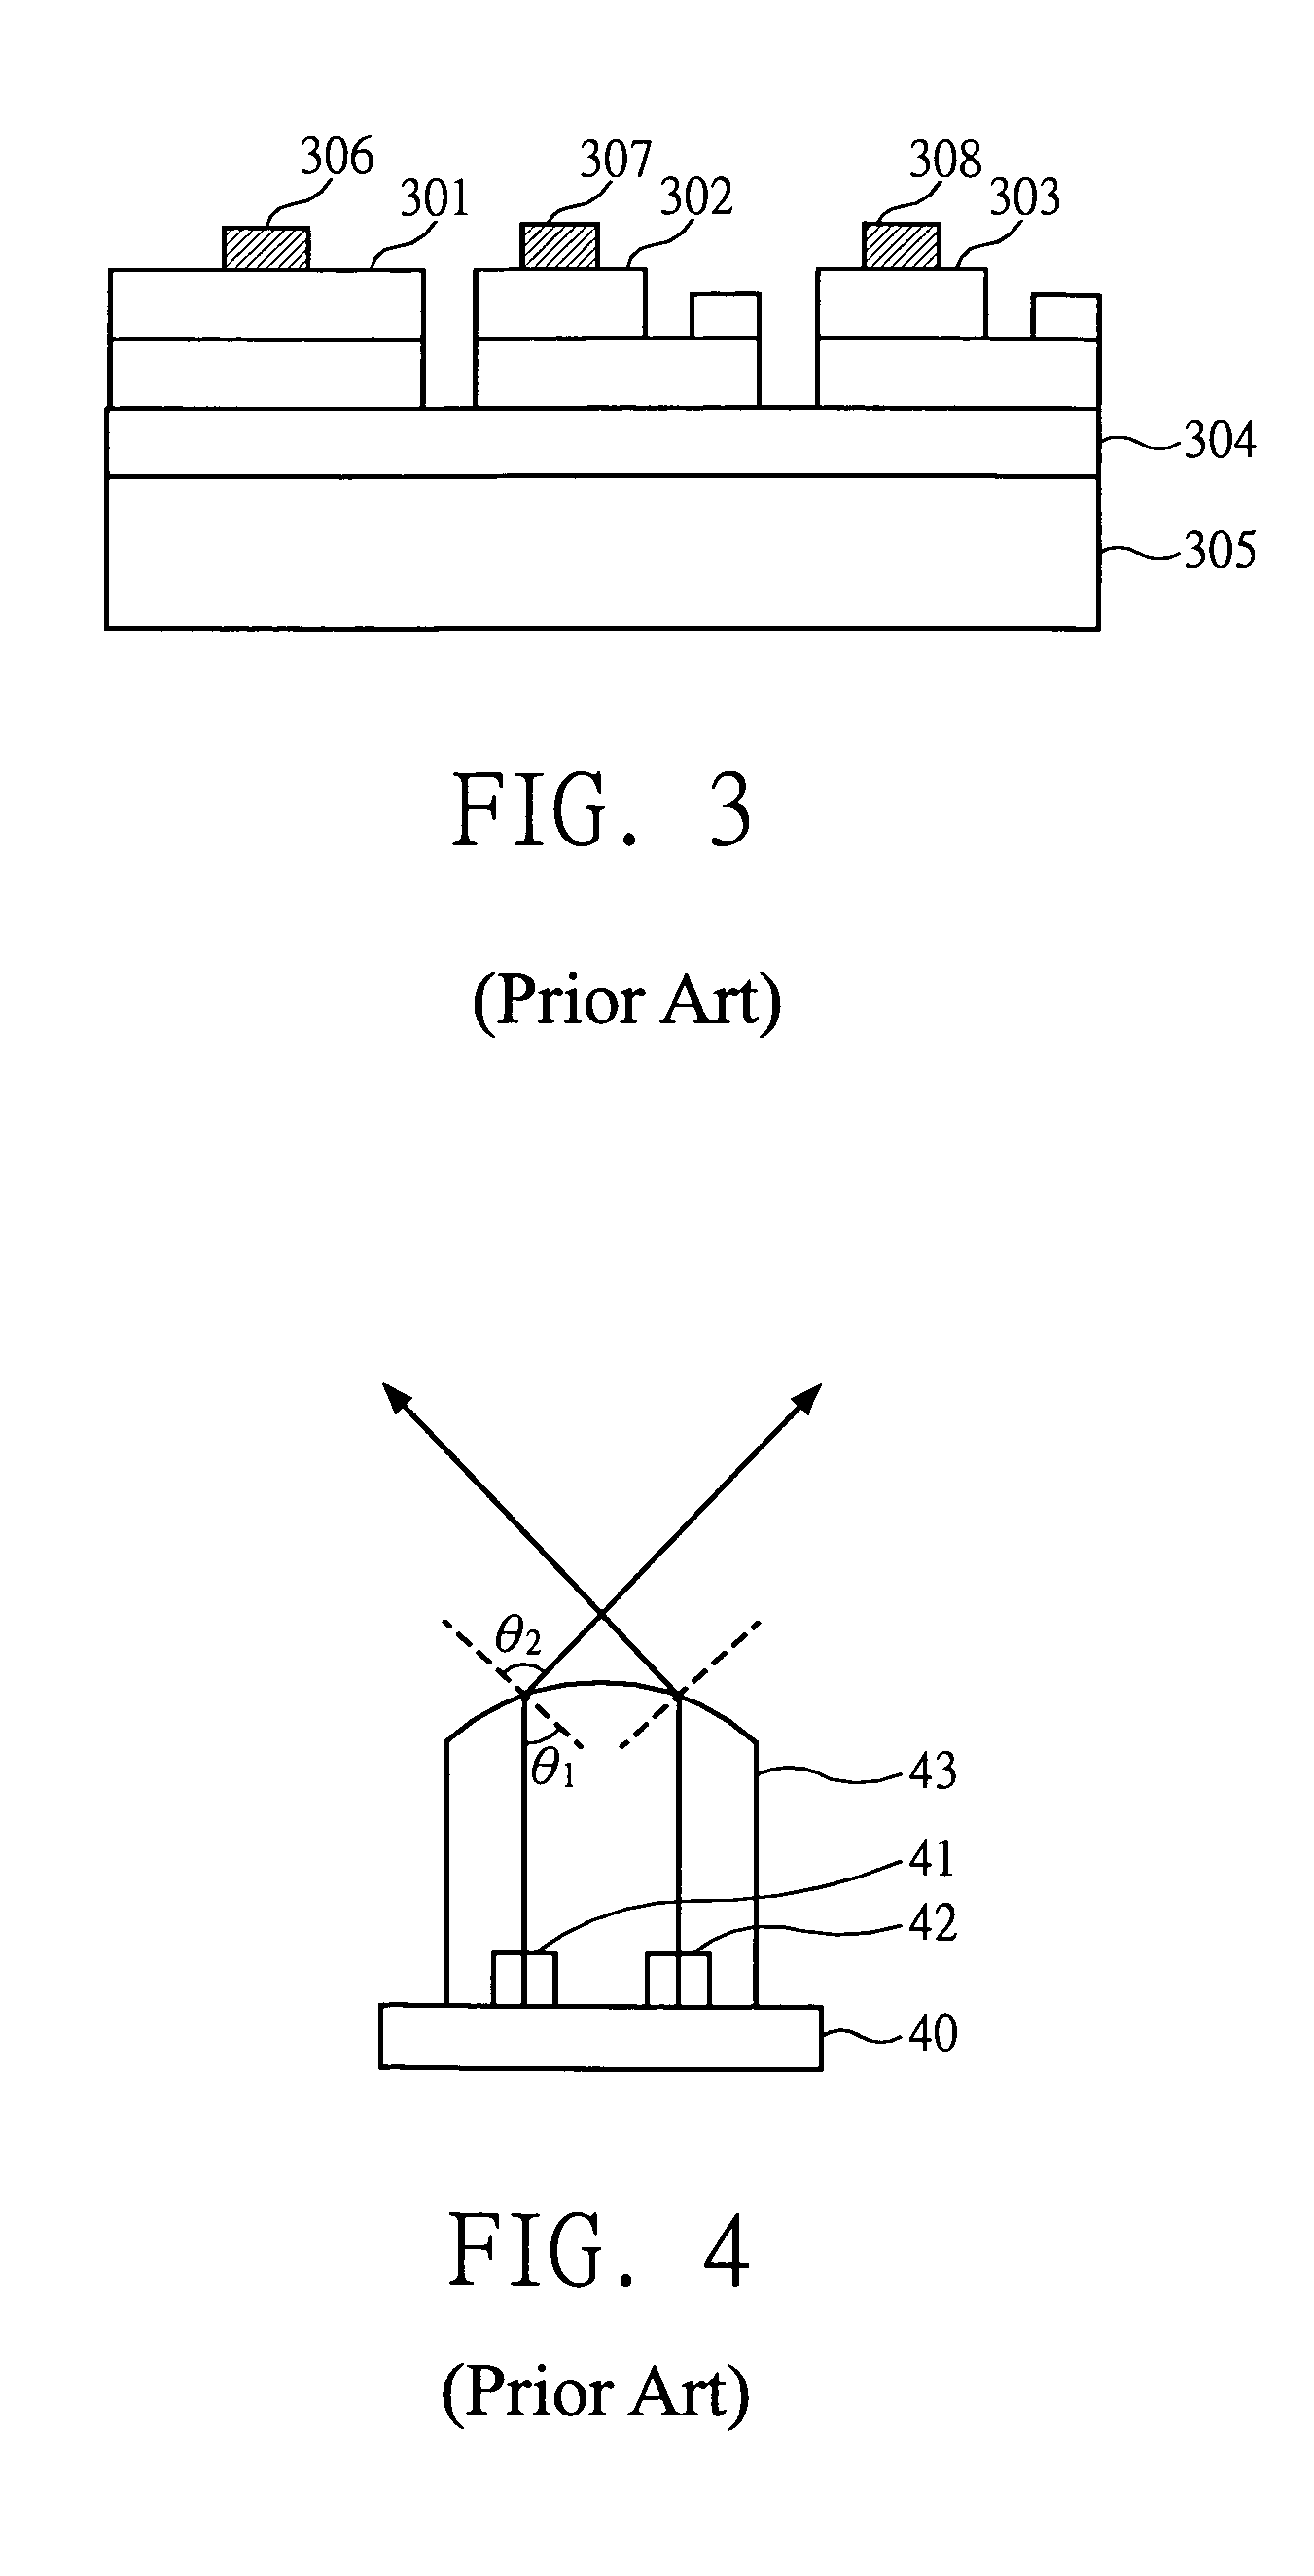 Multichip light emitting diode package